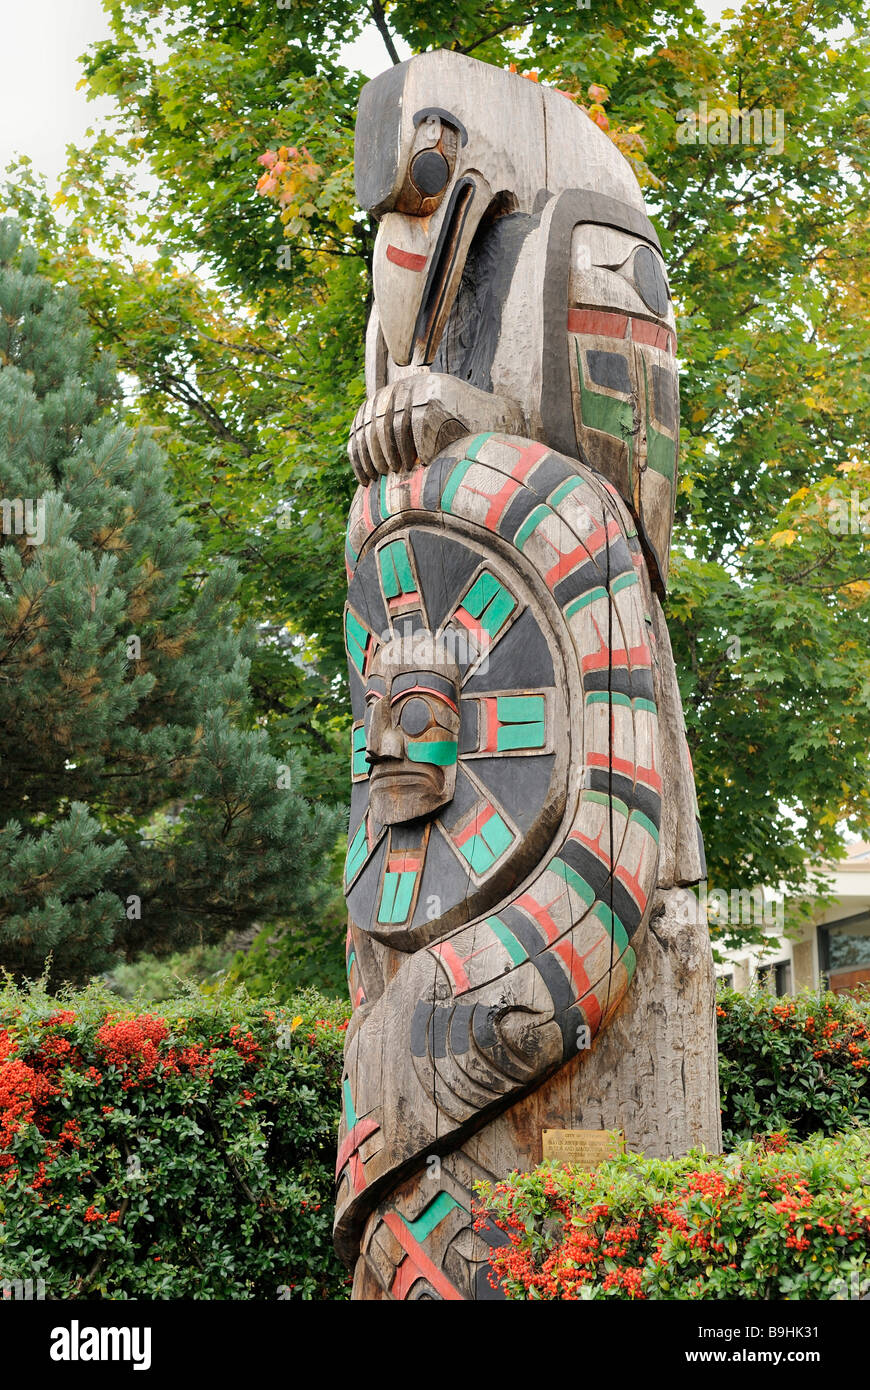 Totem pole of the Cowichan Tribe, Duncan, Vancouver Island, British Columbia, Canada, North America Stock Photo